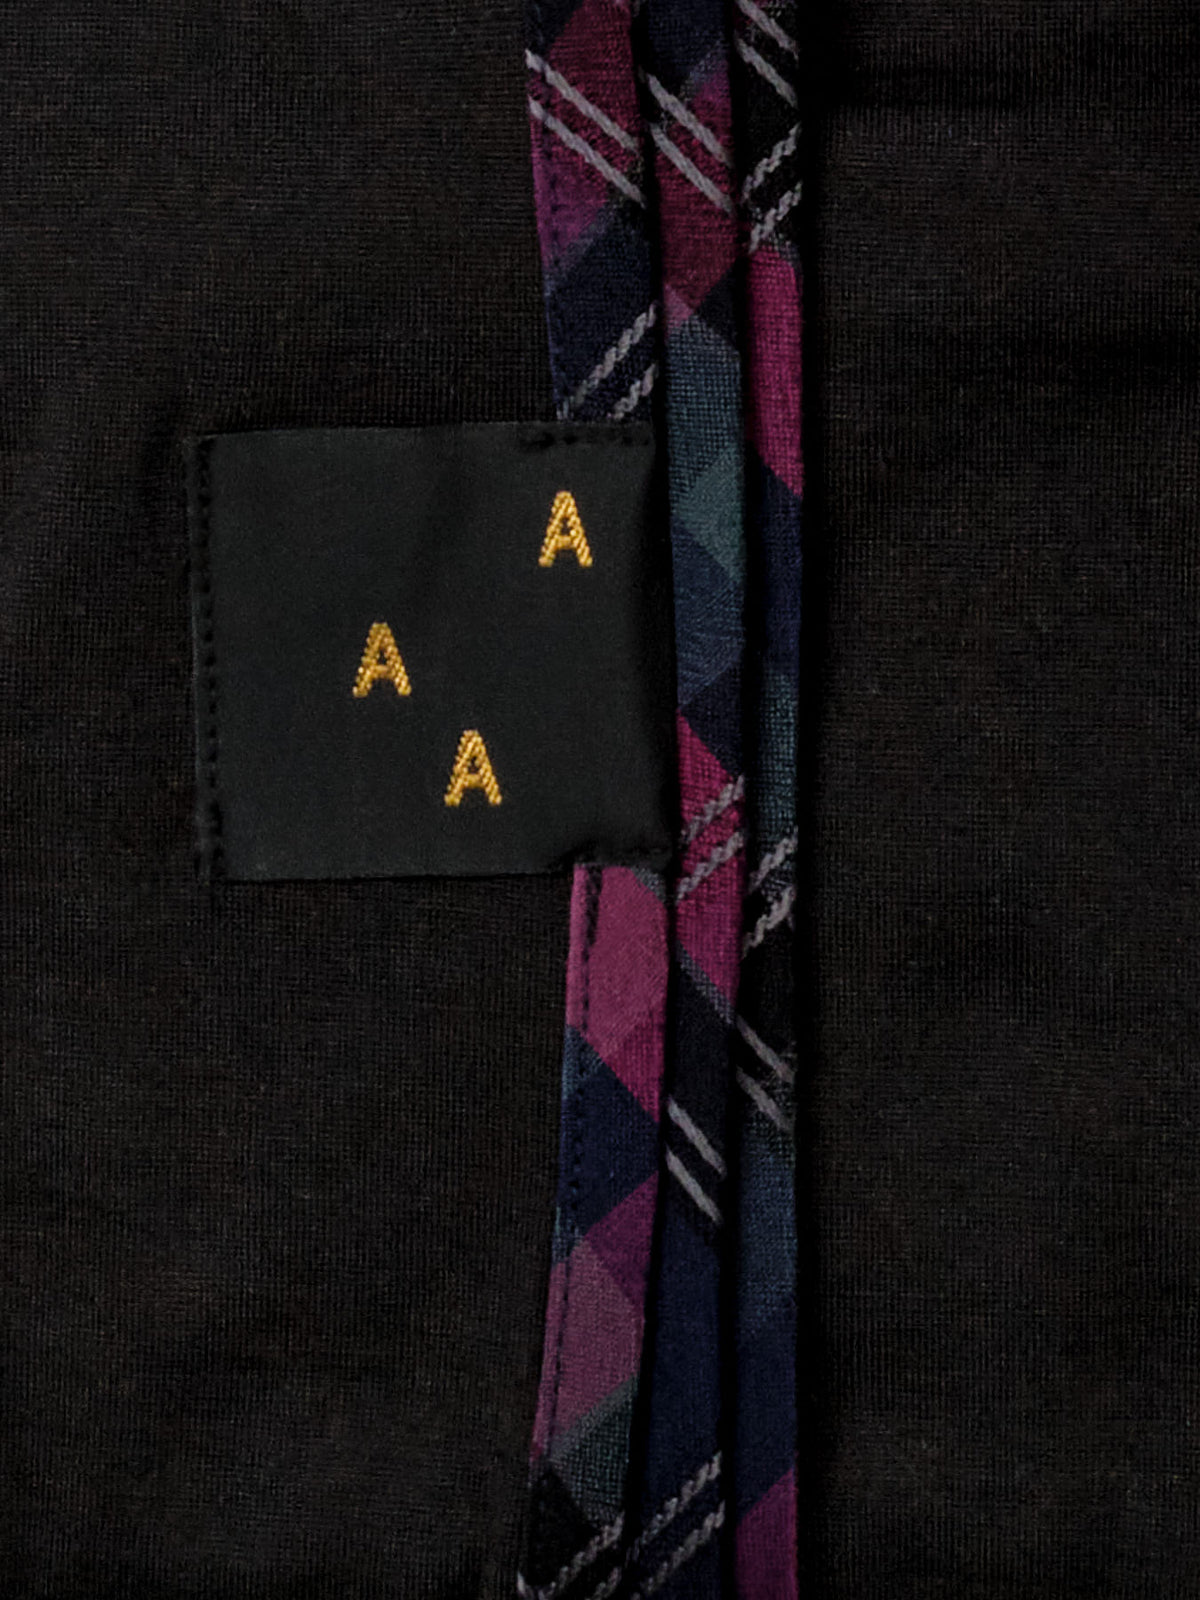 A black and purple plaid tie with an AAA Design on it.